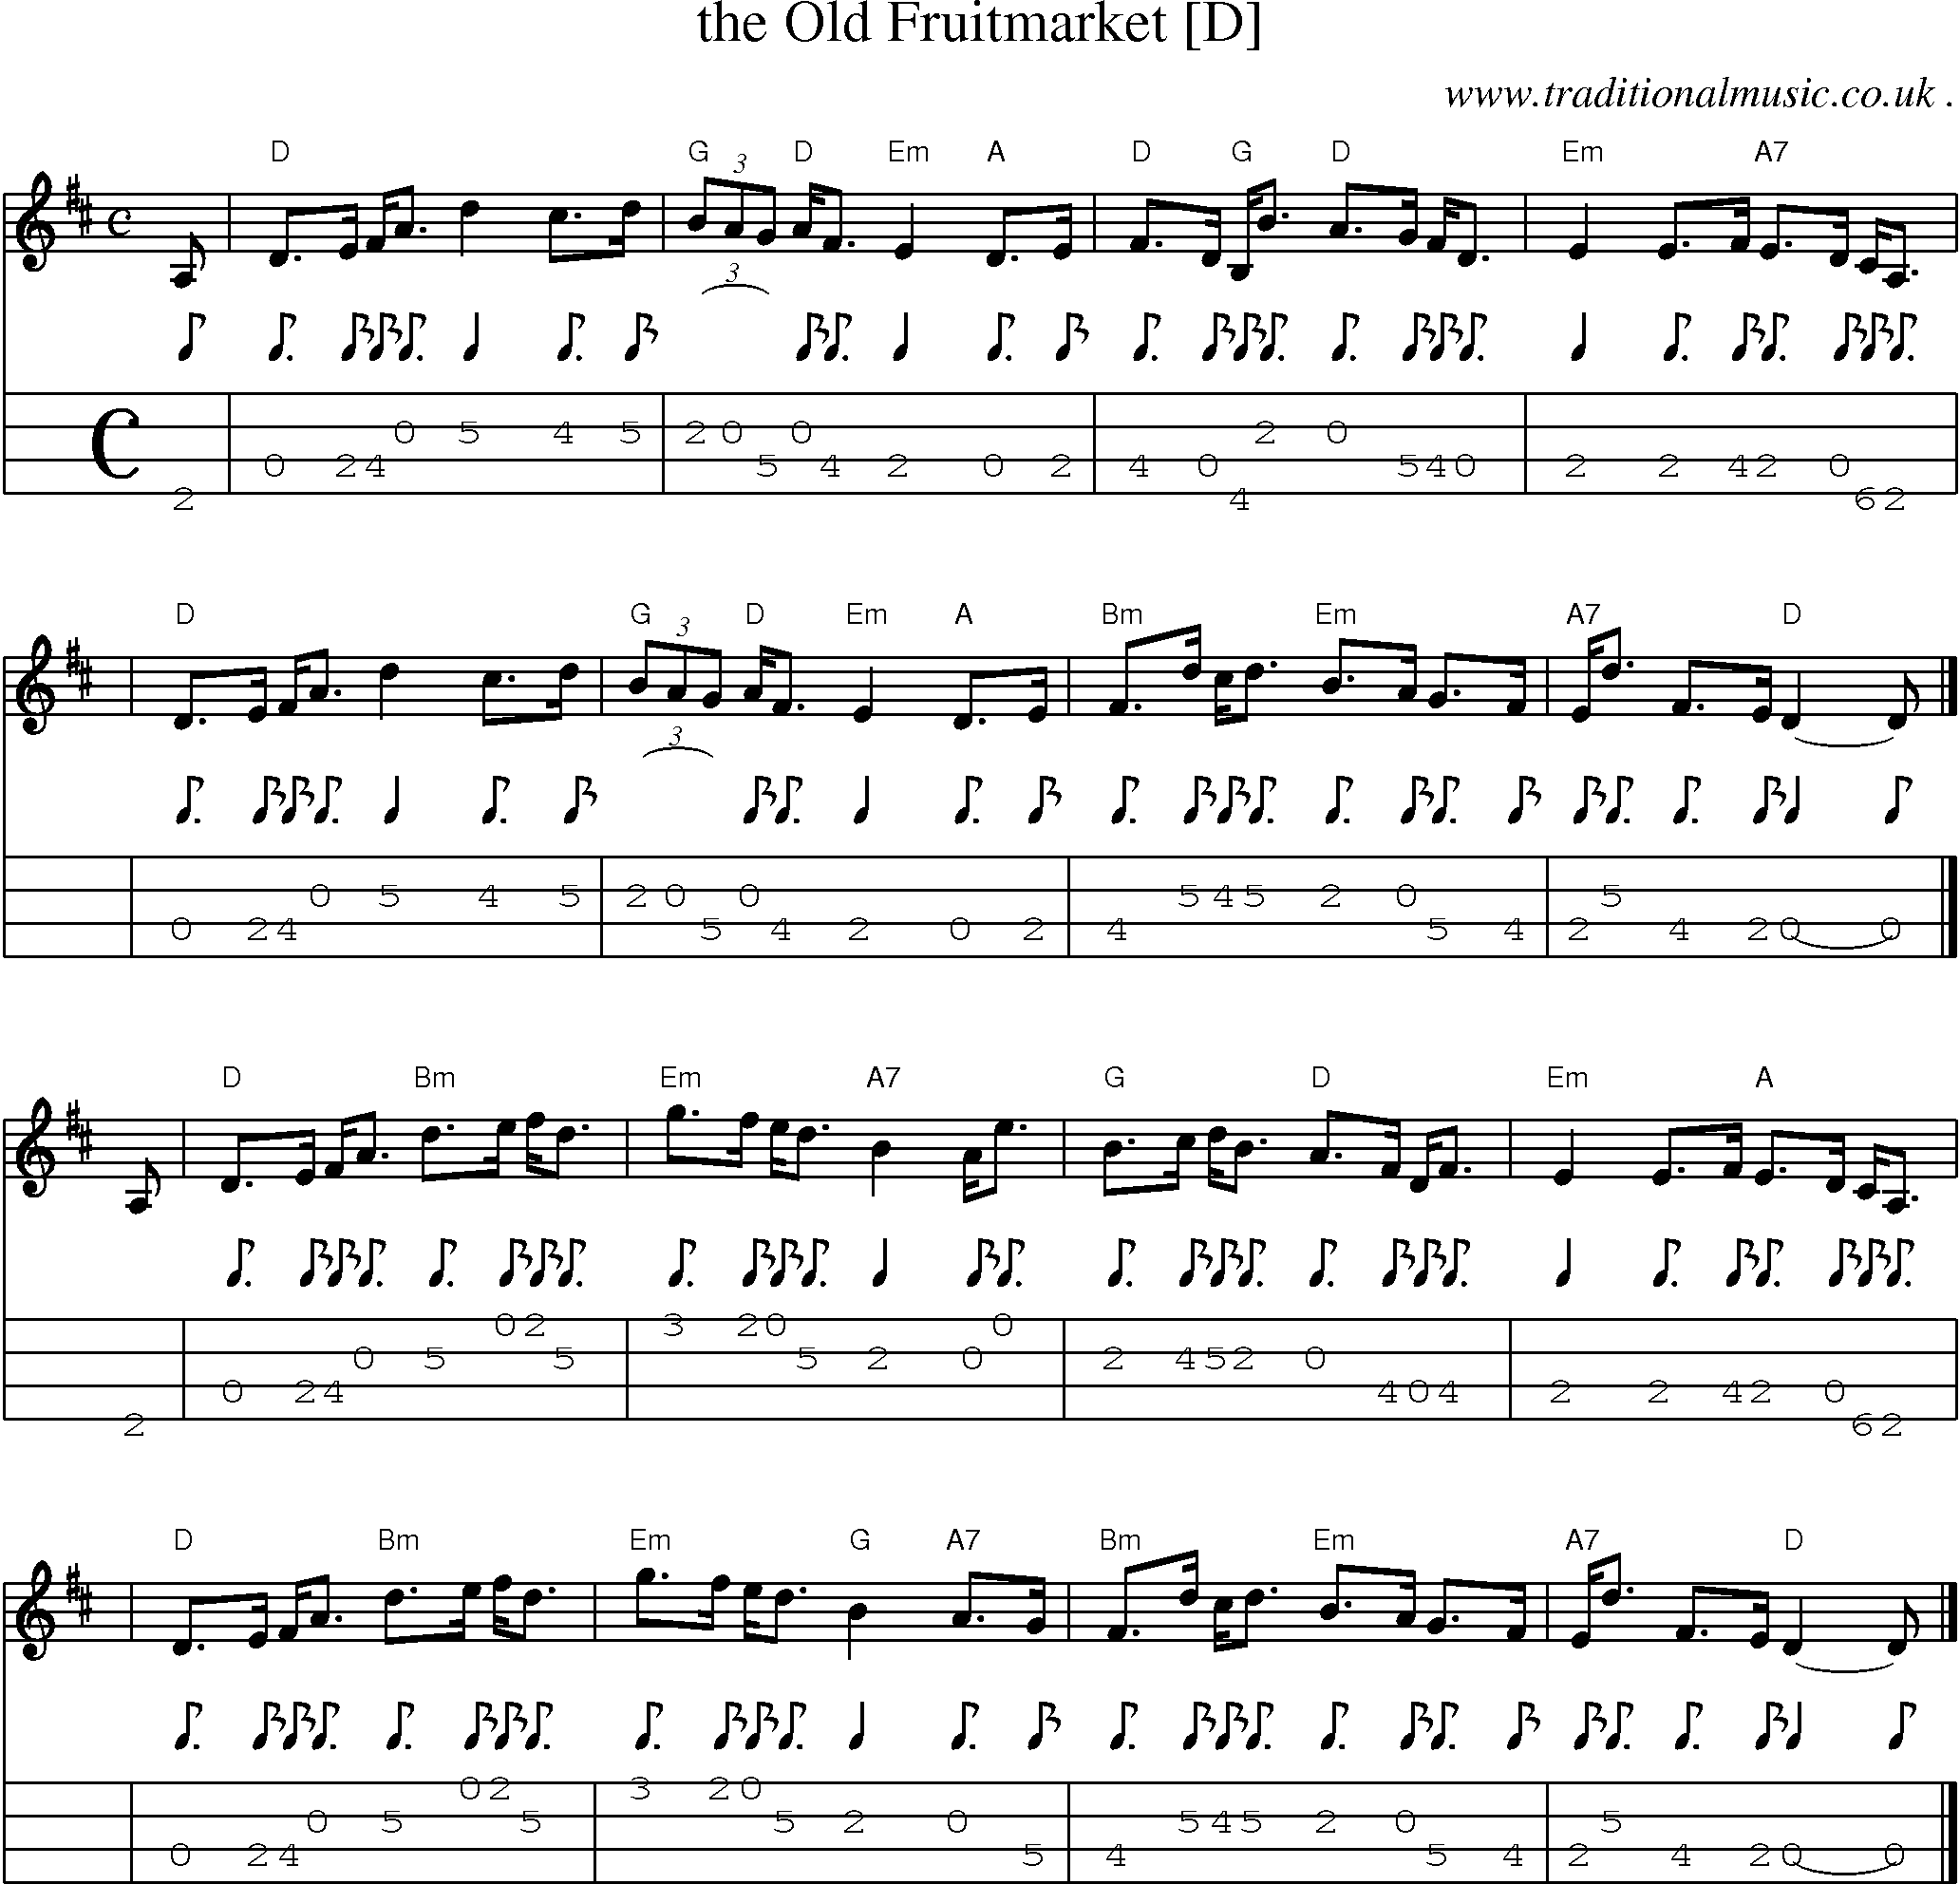 Sheet-music  score, Chords and Mandolin Tabs for The Old Fruitmarket [d]